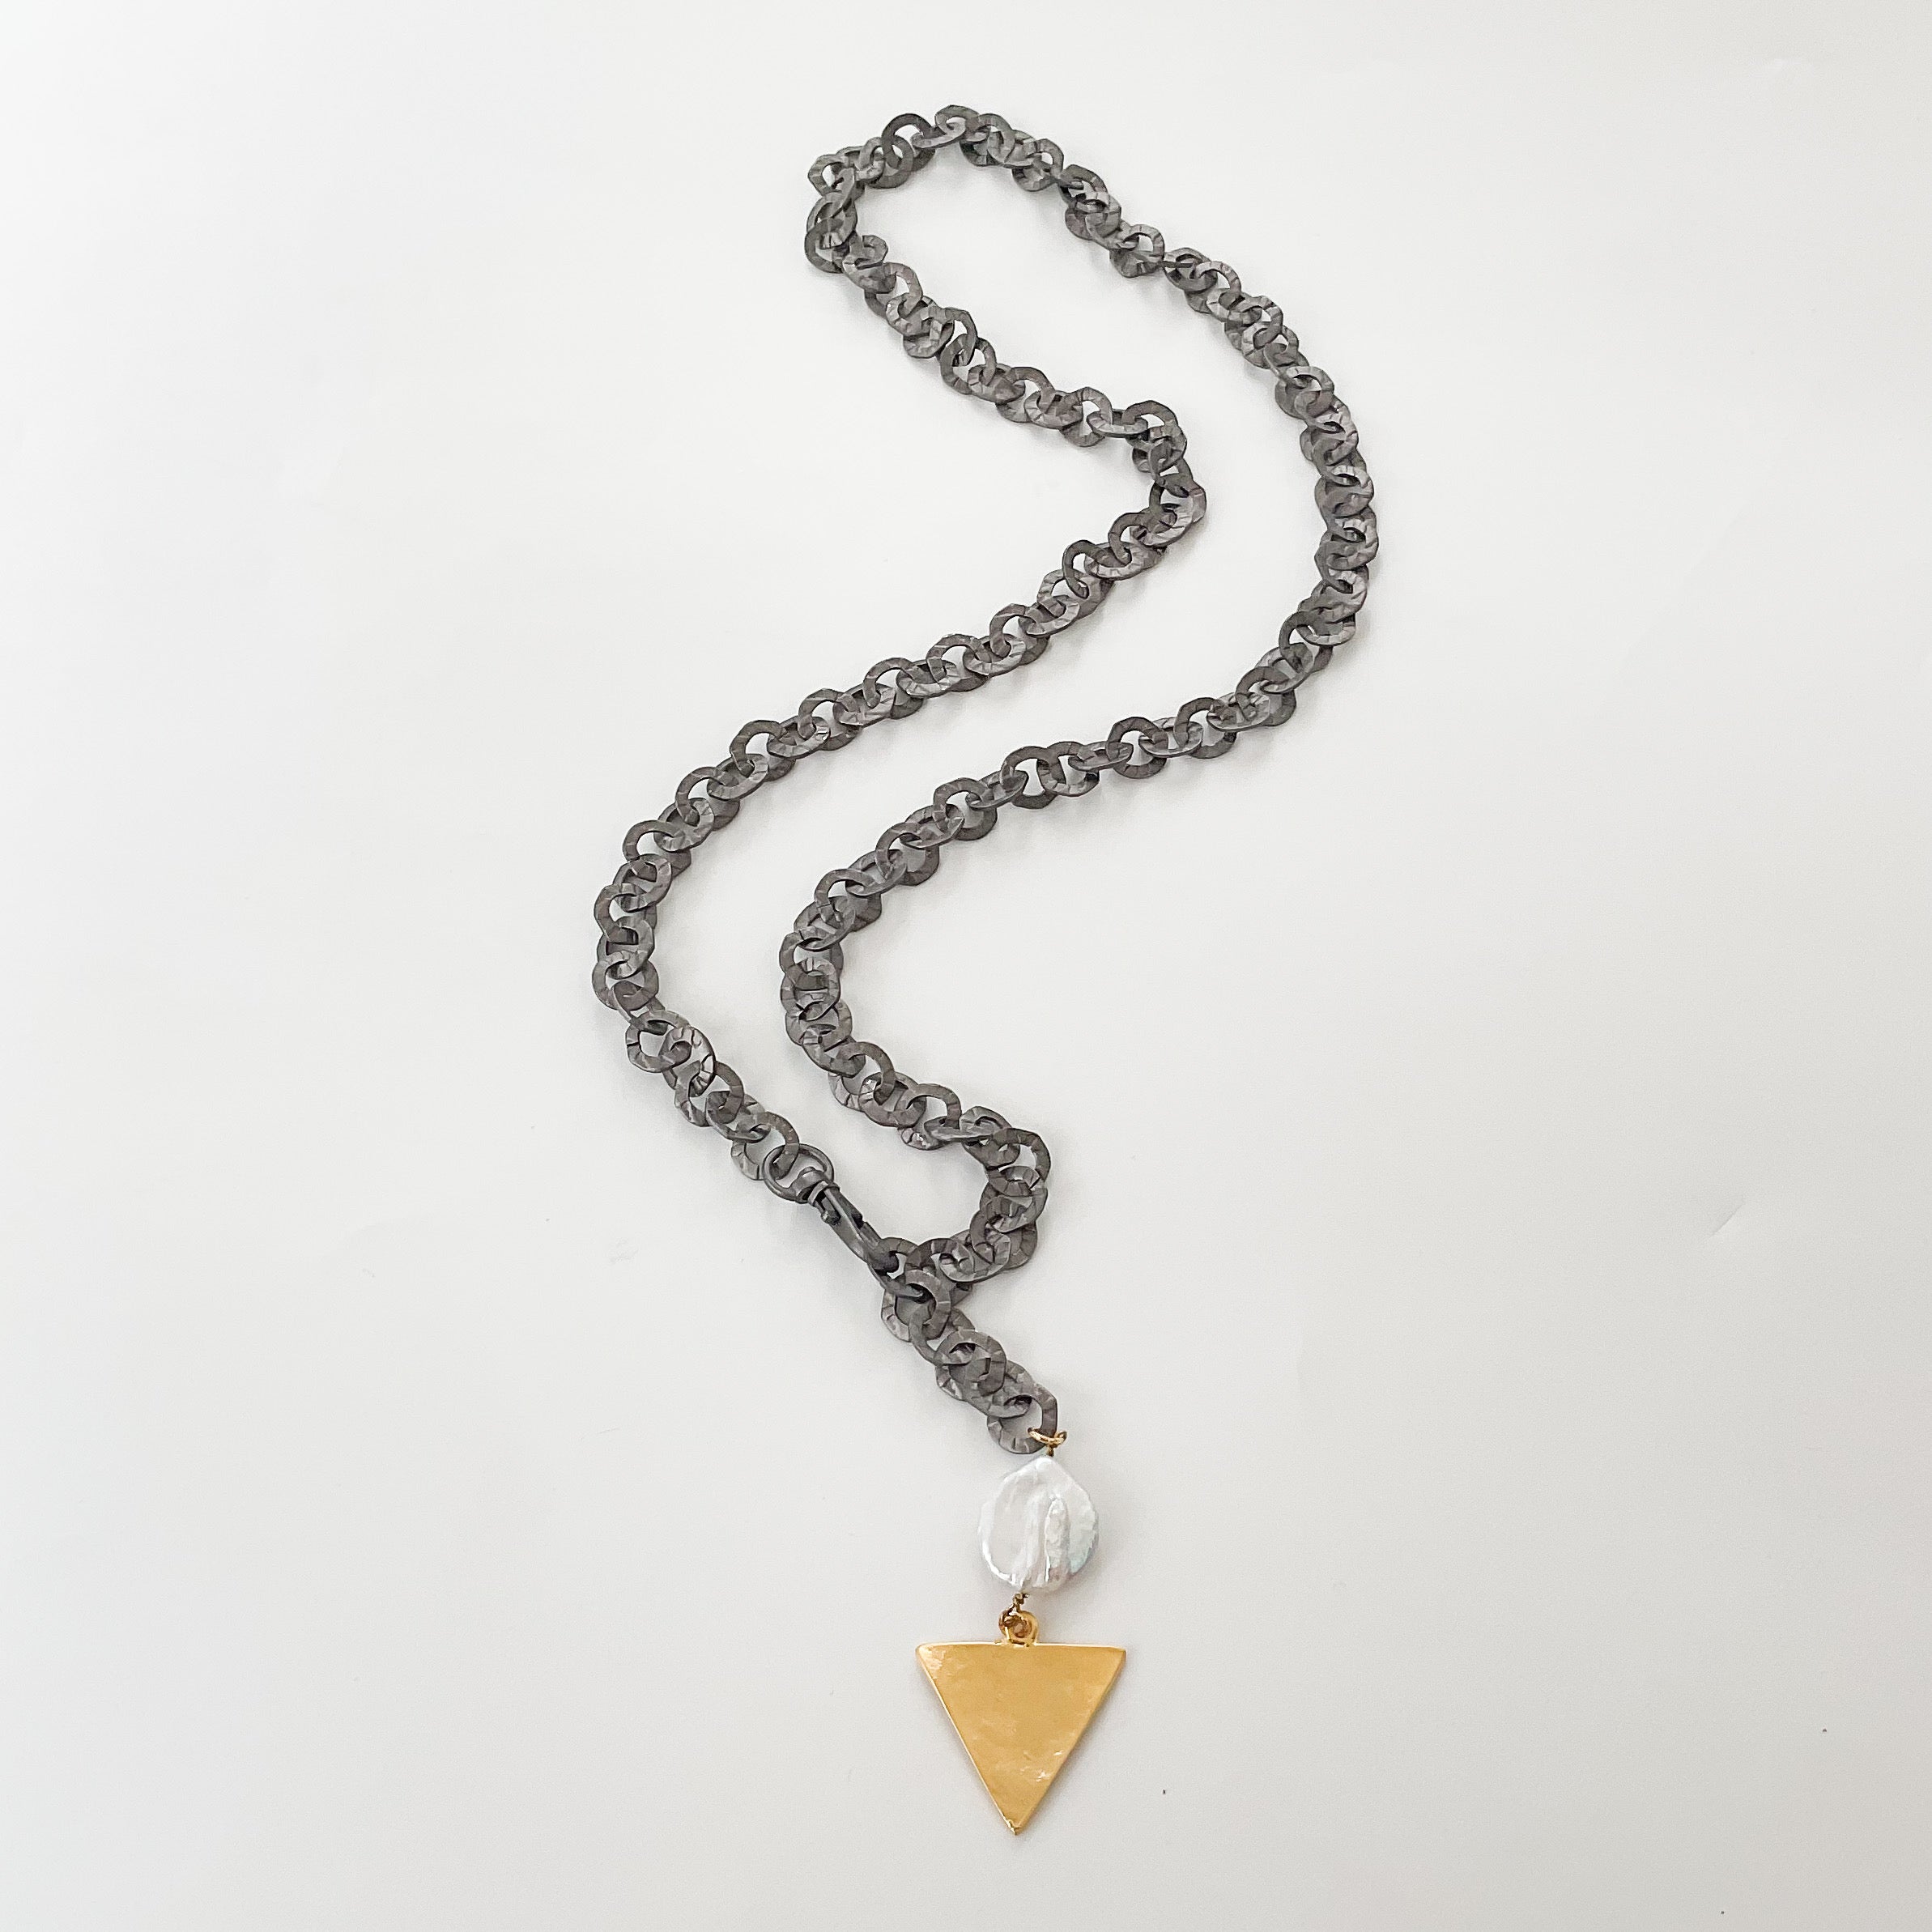 Adjustable Washer Chain Necklace w/ Pearl Triangle